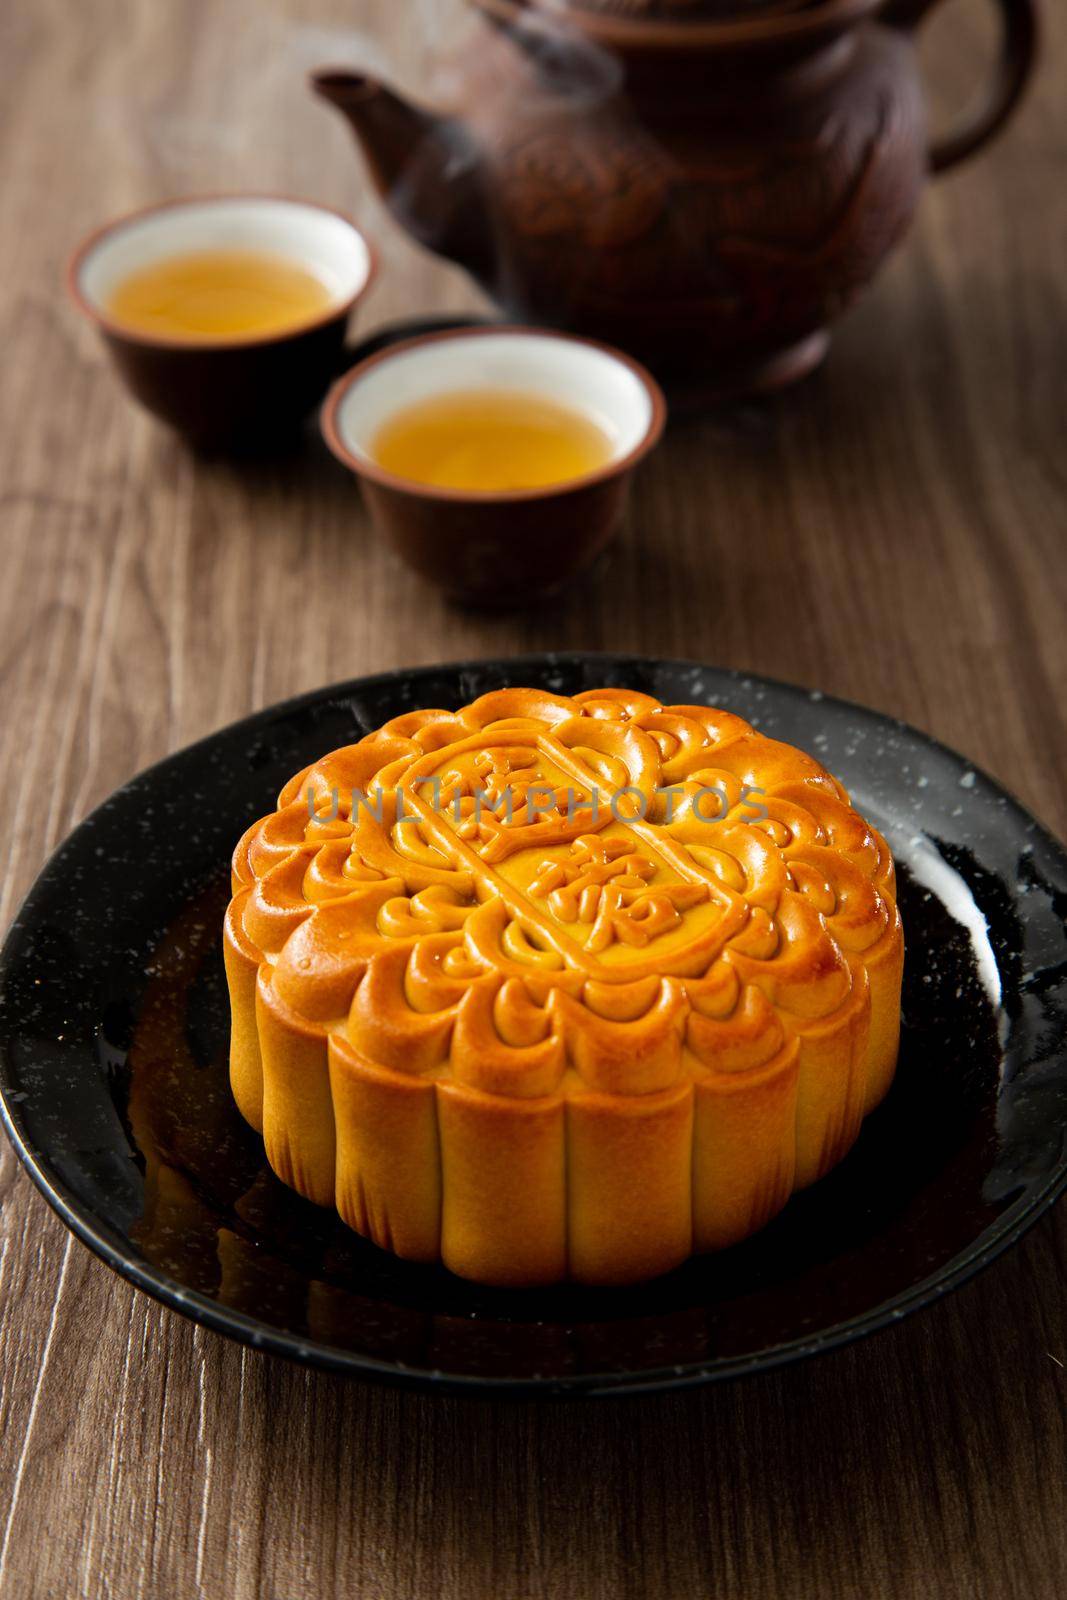 Moon cakes with Chinese tea. The Chinese character on the mooncake represent "Pandan lotus paste" in English